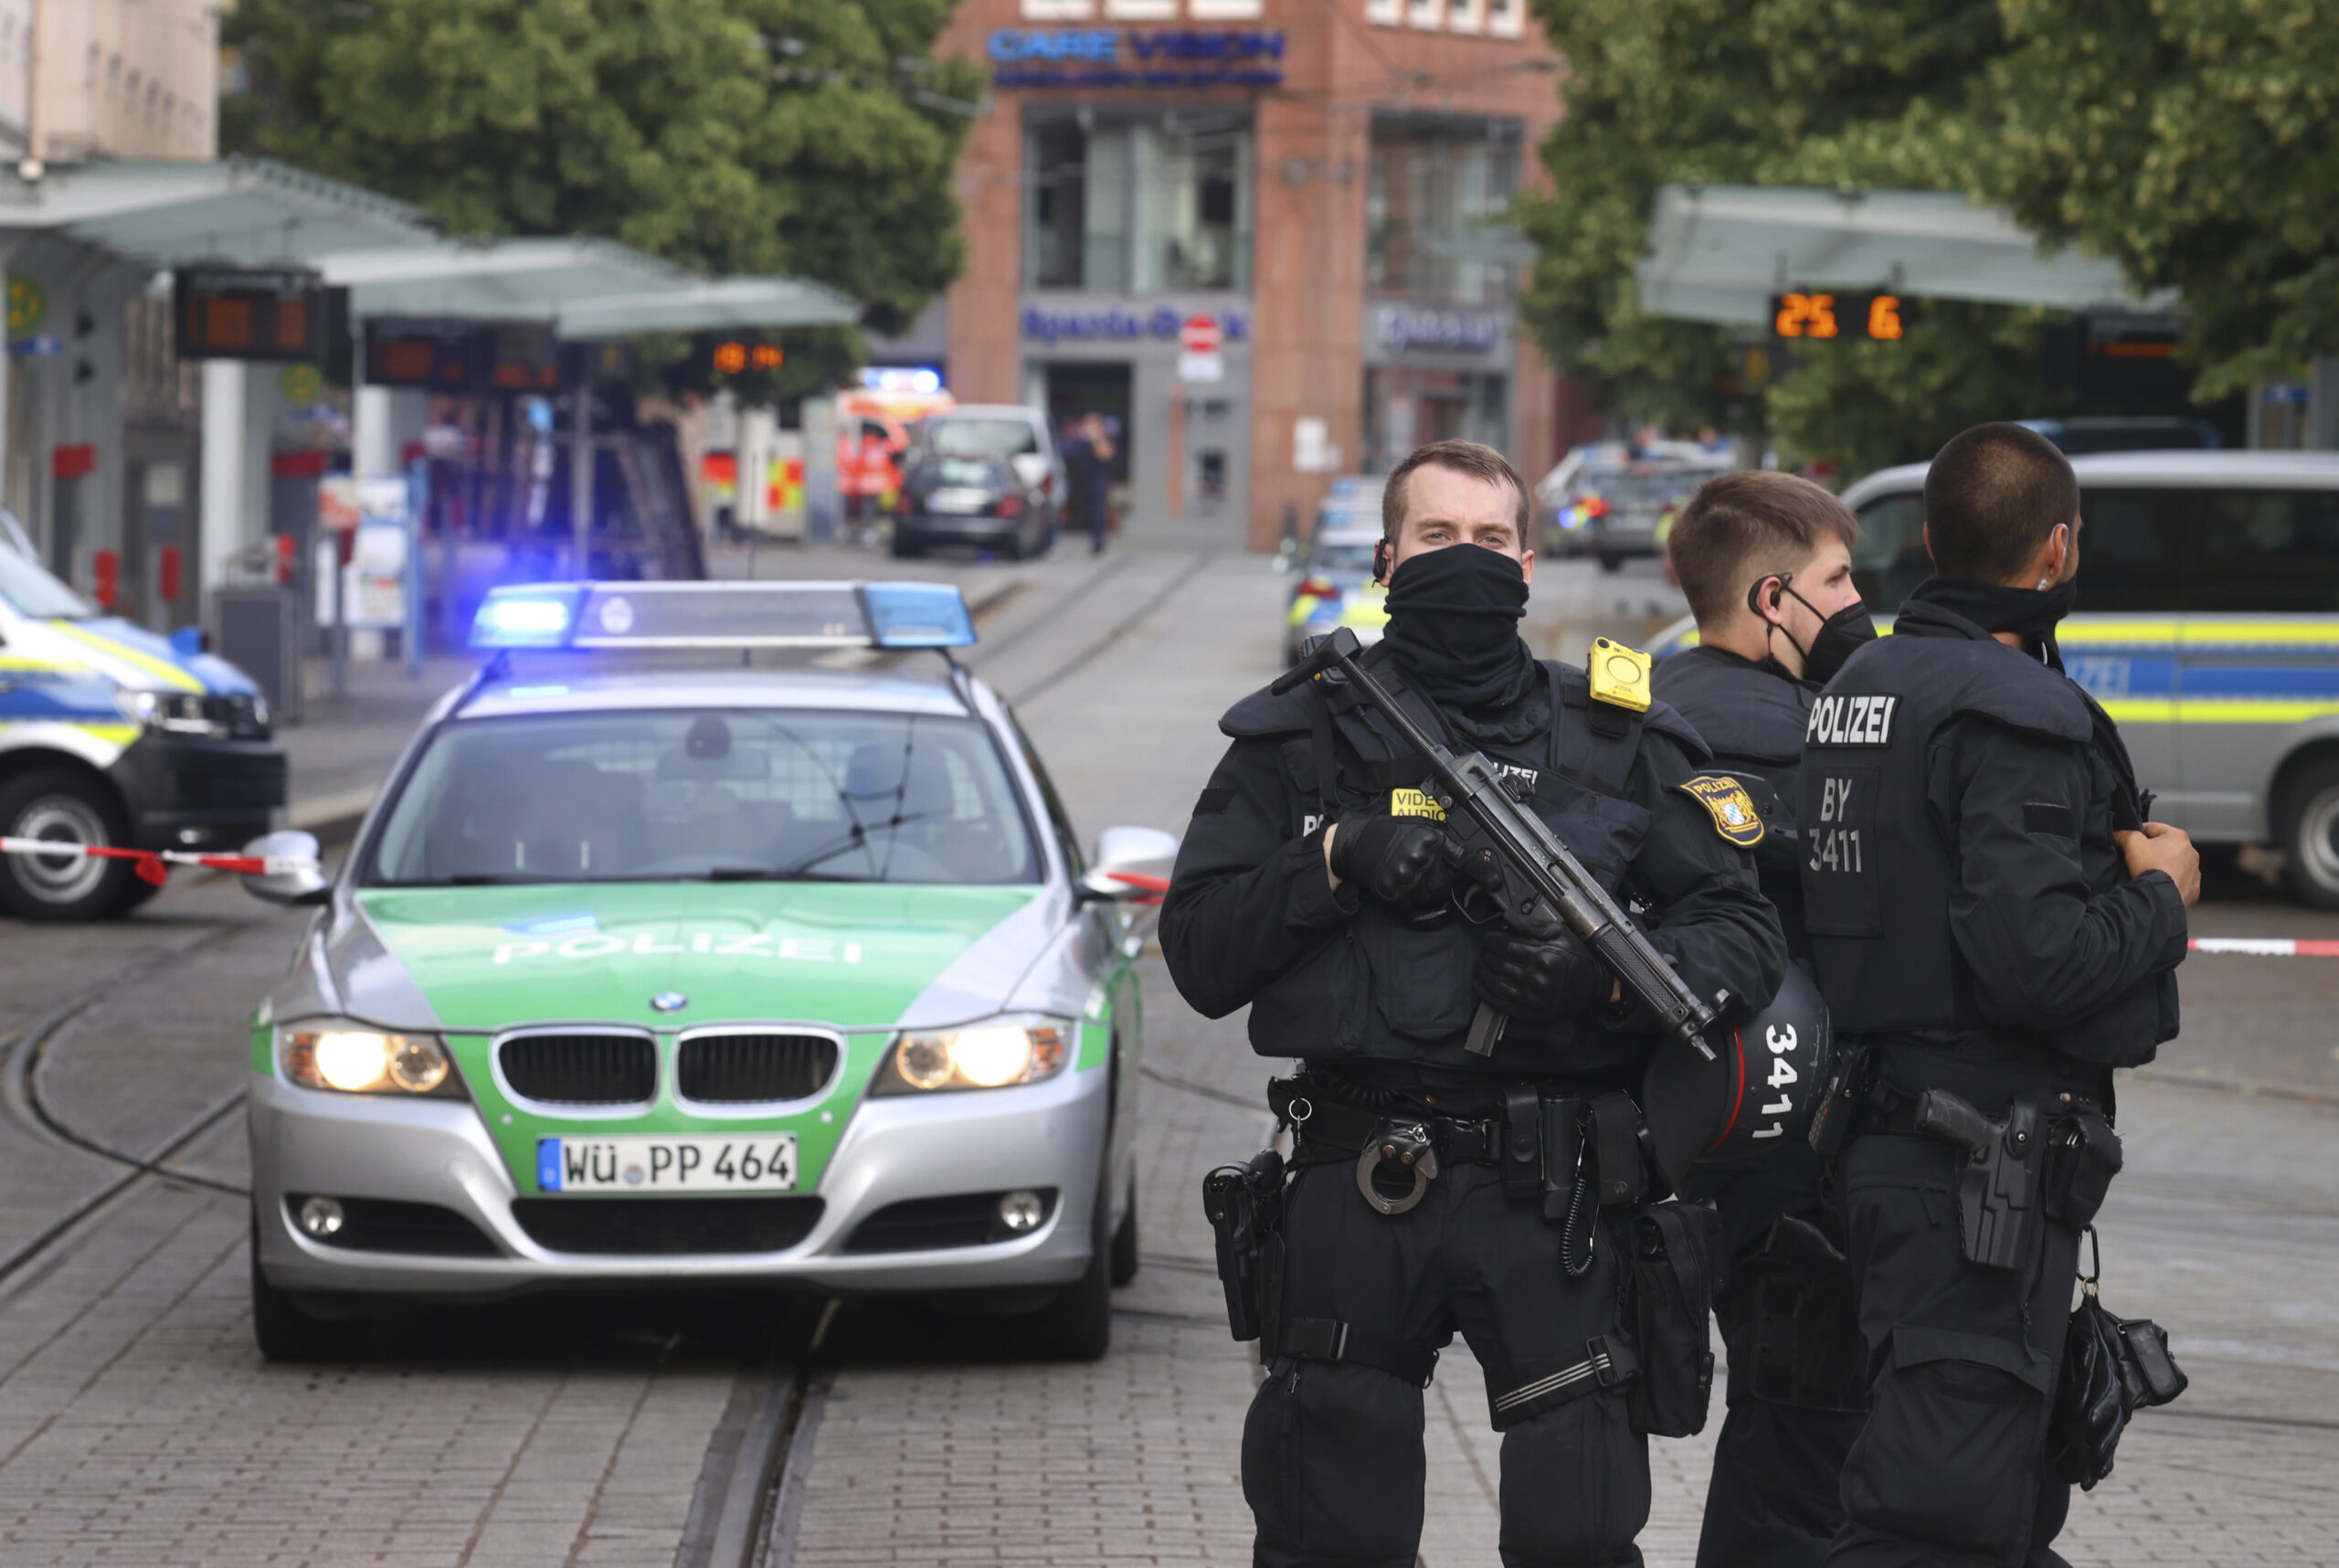 Police cars attend the scene of an incident in Wuerzburg, Germany, Friday June 25, 2021. German police say several people have been killed and others injured in a knife attack in the southern city of Wuerzburg on Friday. (Karl-Josef Hildenbrand/dpa via AP)